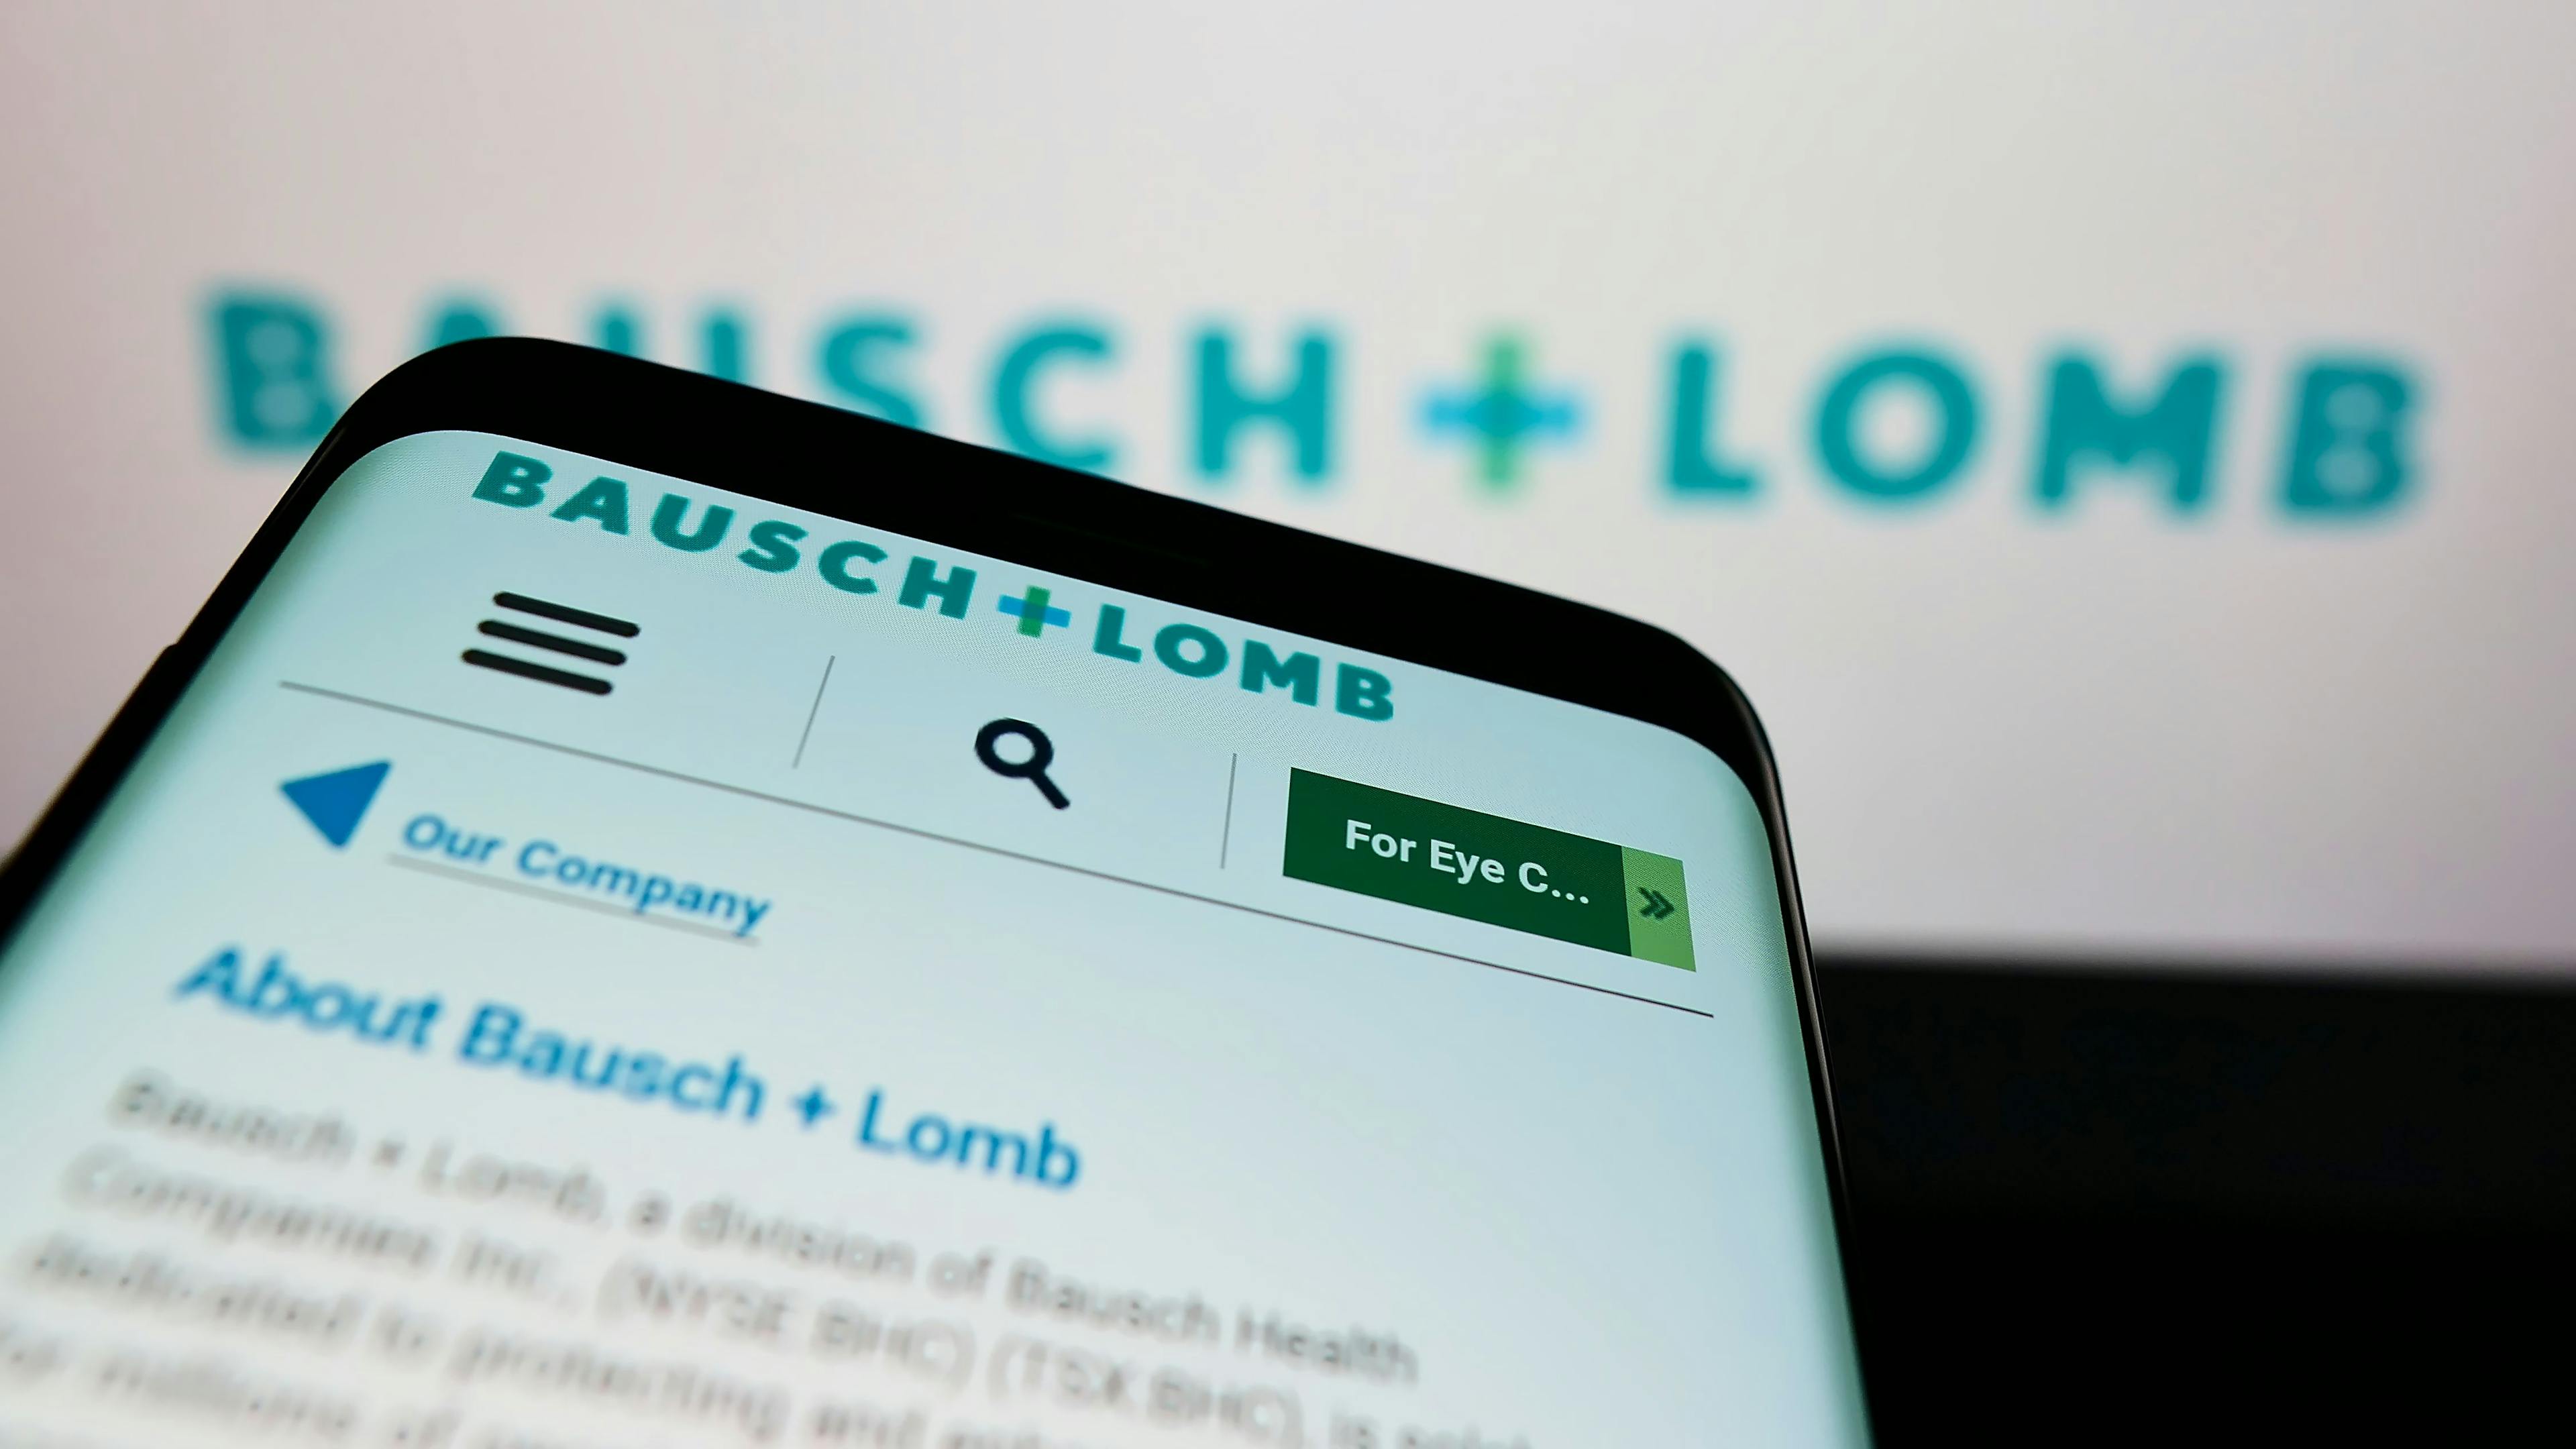 Brent Saunders will join Bausch + Lomb on Thursday, Feb. 16, in an advisory capacity, where he will work closely with outgoing CEO Joseph Papa. (Adobe Stock image)